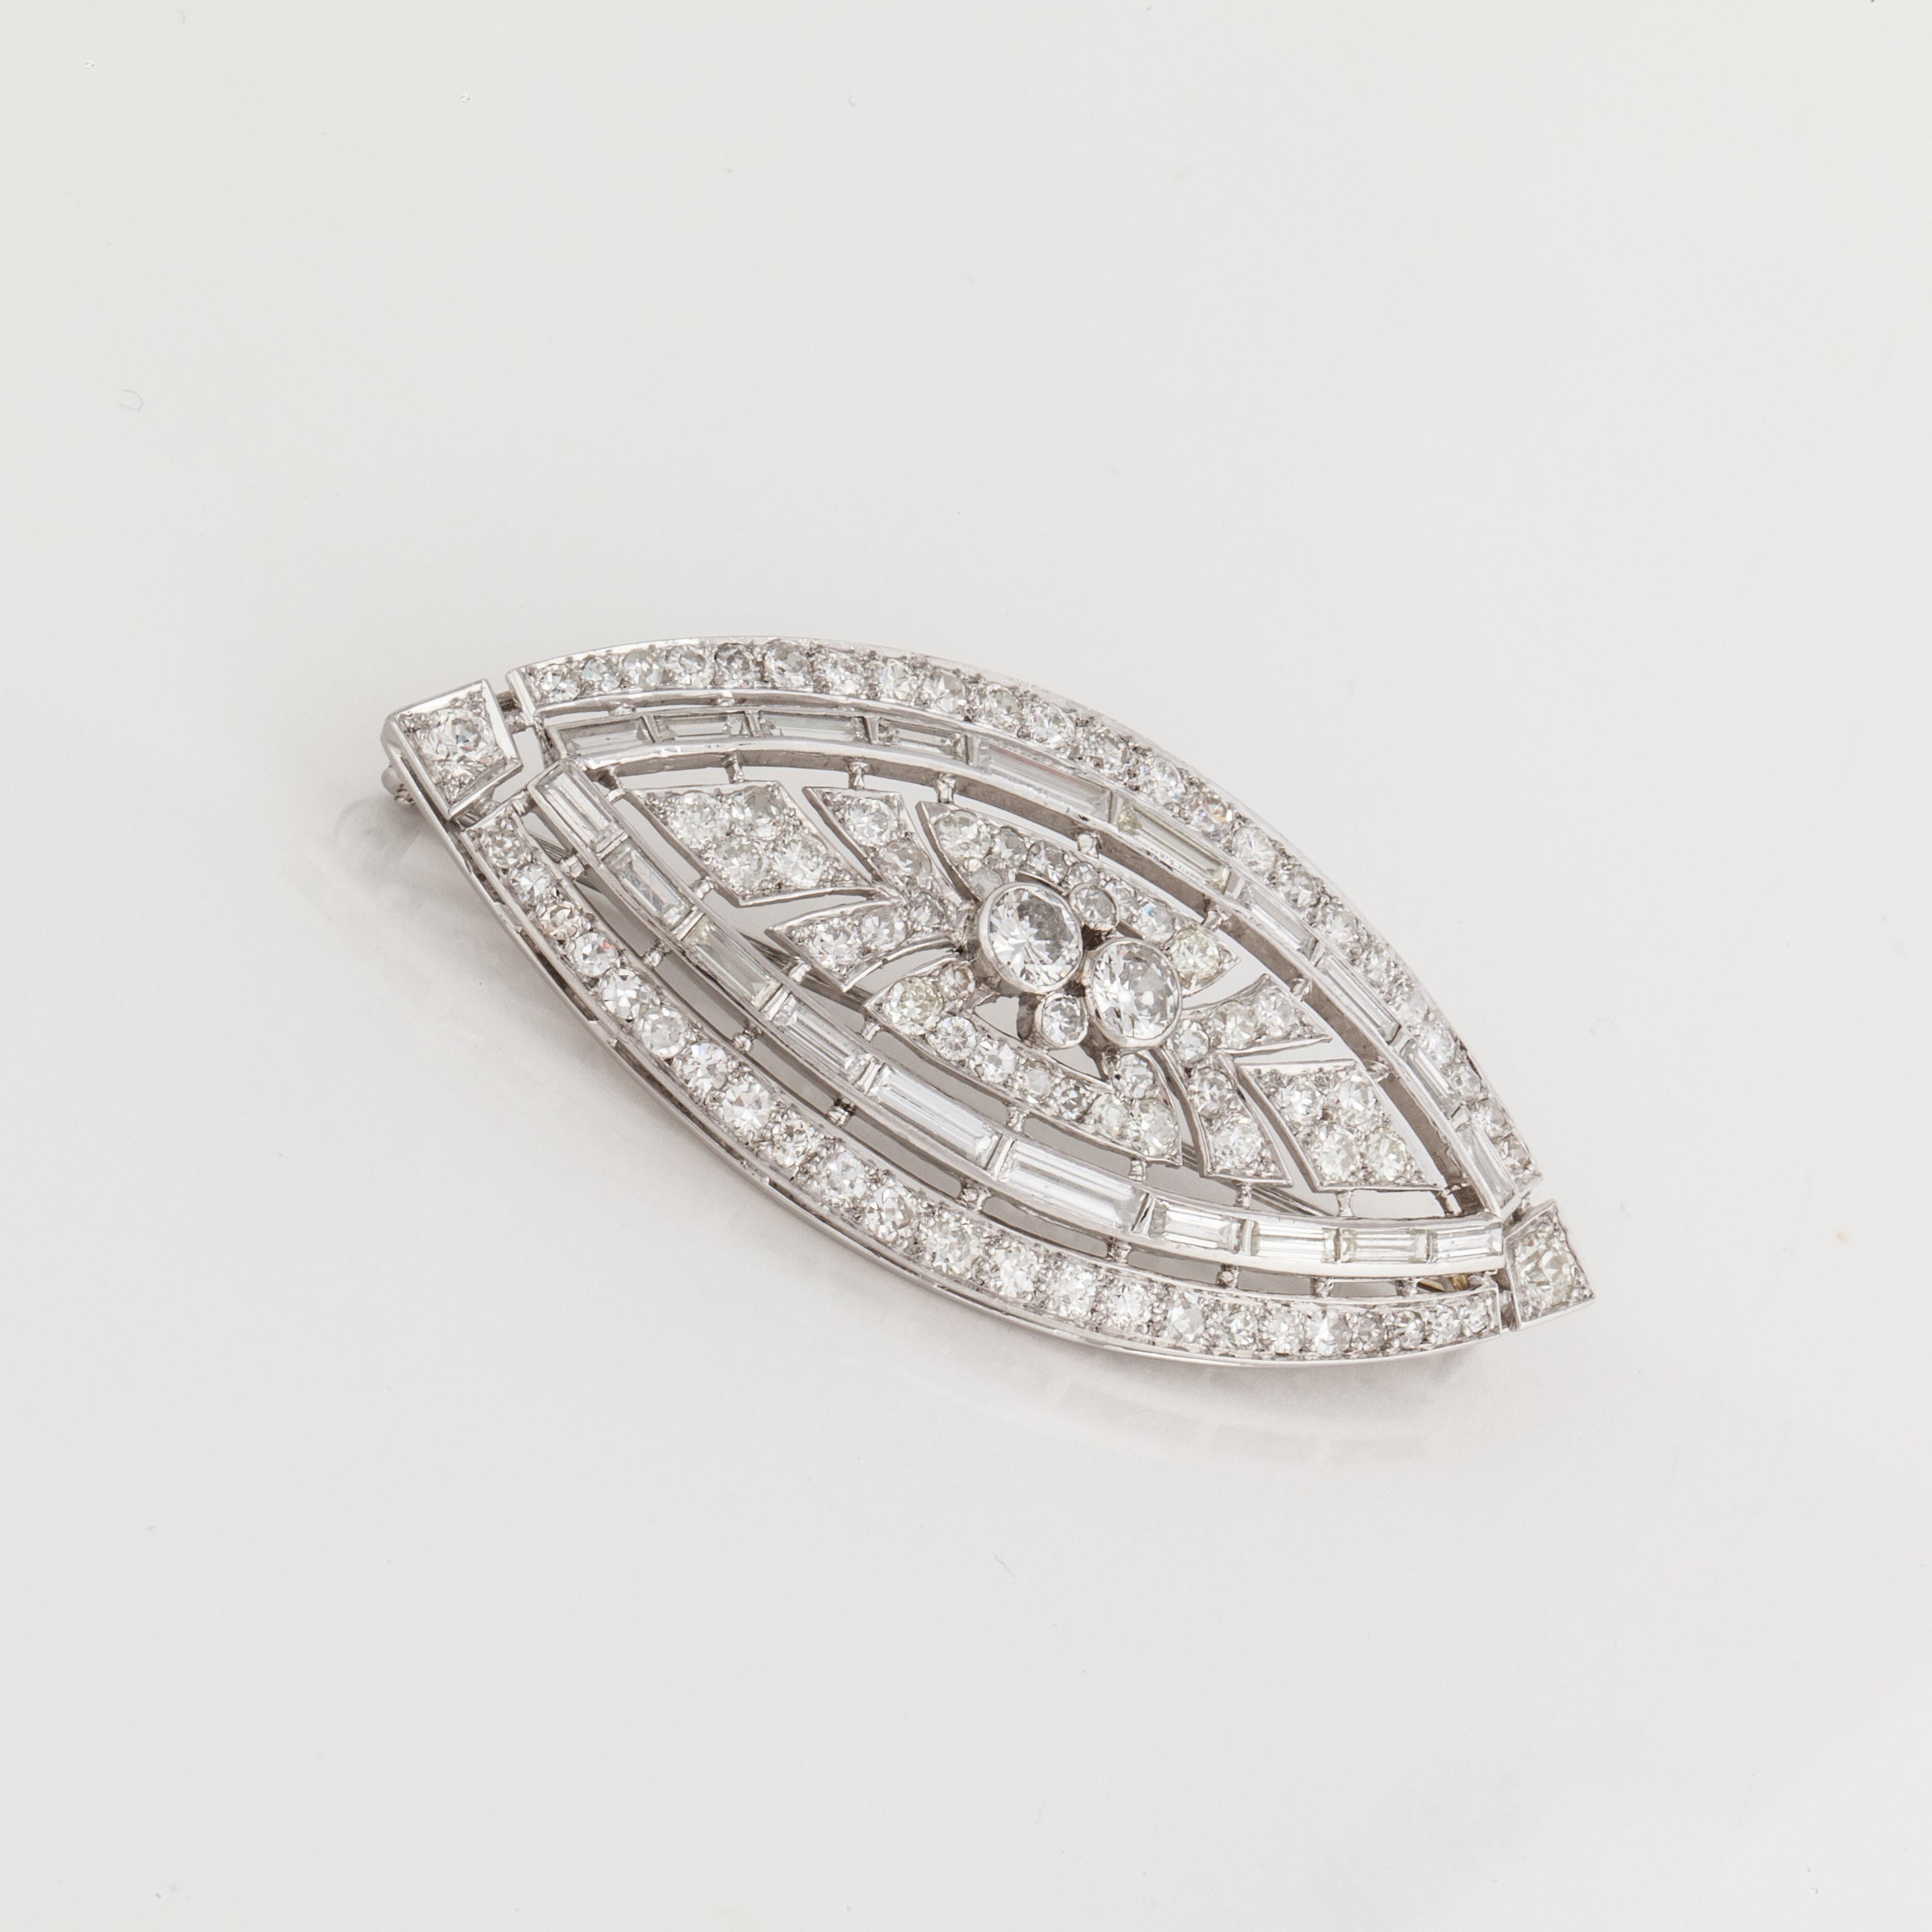 Platinum marquise shaped diamond brooch with round and baguette diamonds that total 5.42 carats; H-K color and VS1-SI2 clarity.  The brooch measures 2 3/8 inches long and 1 1/8 inches wide.  Clasp has a trombone closure. Circa 1930's-1940's.
